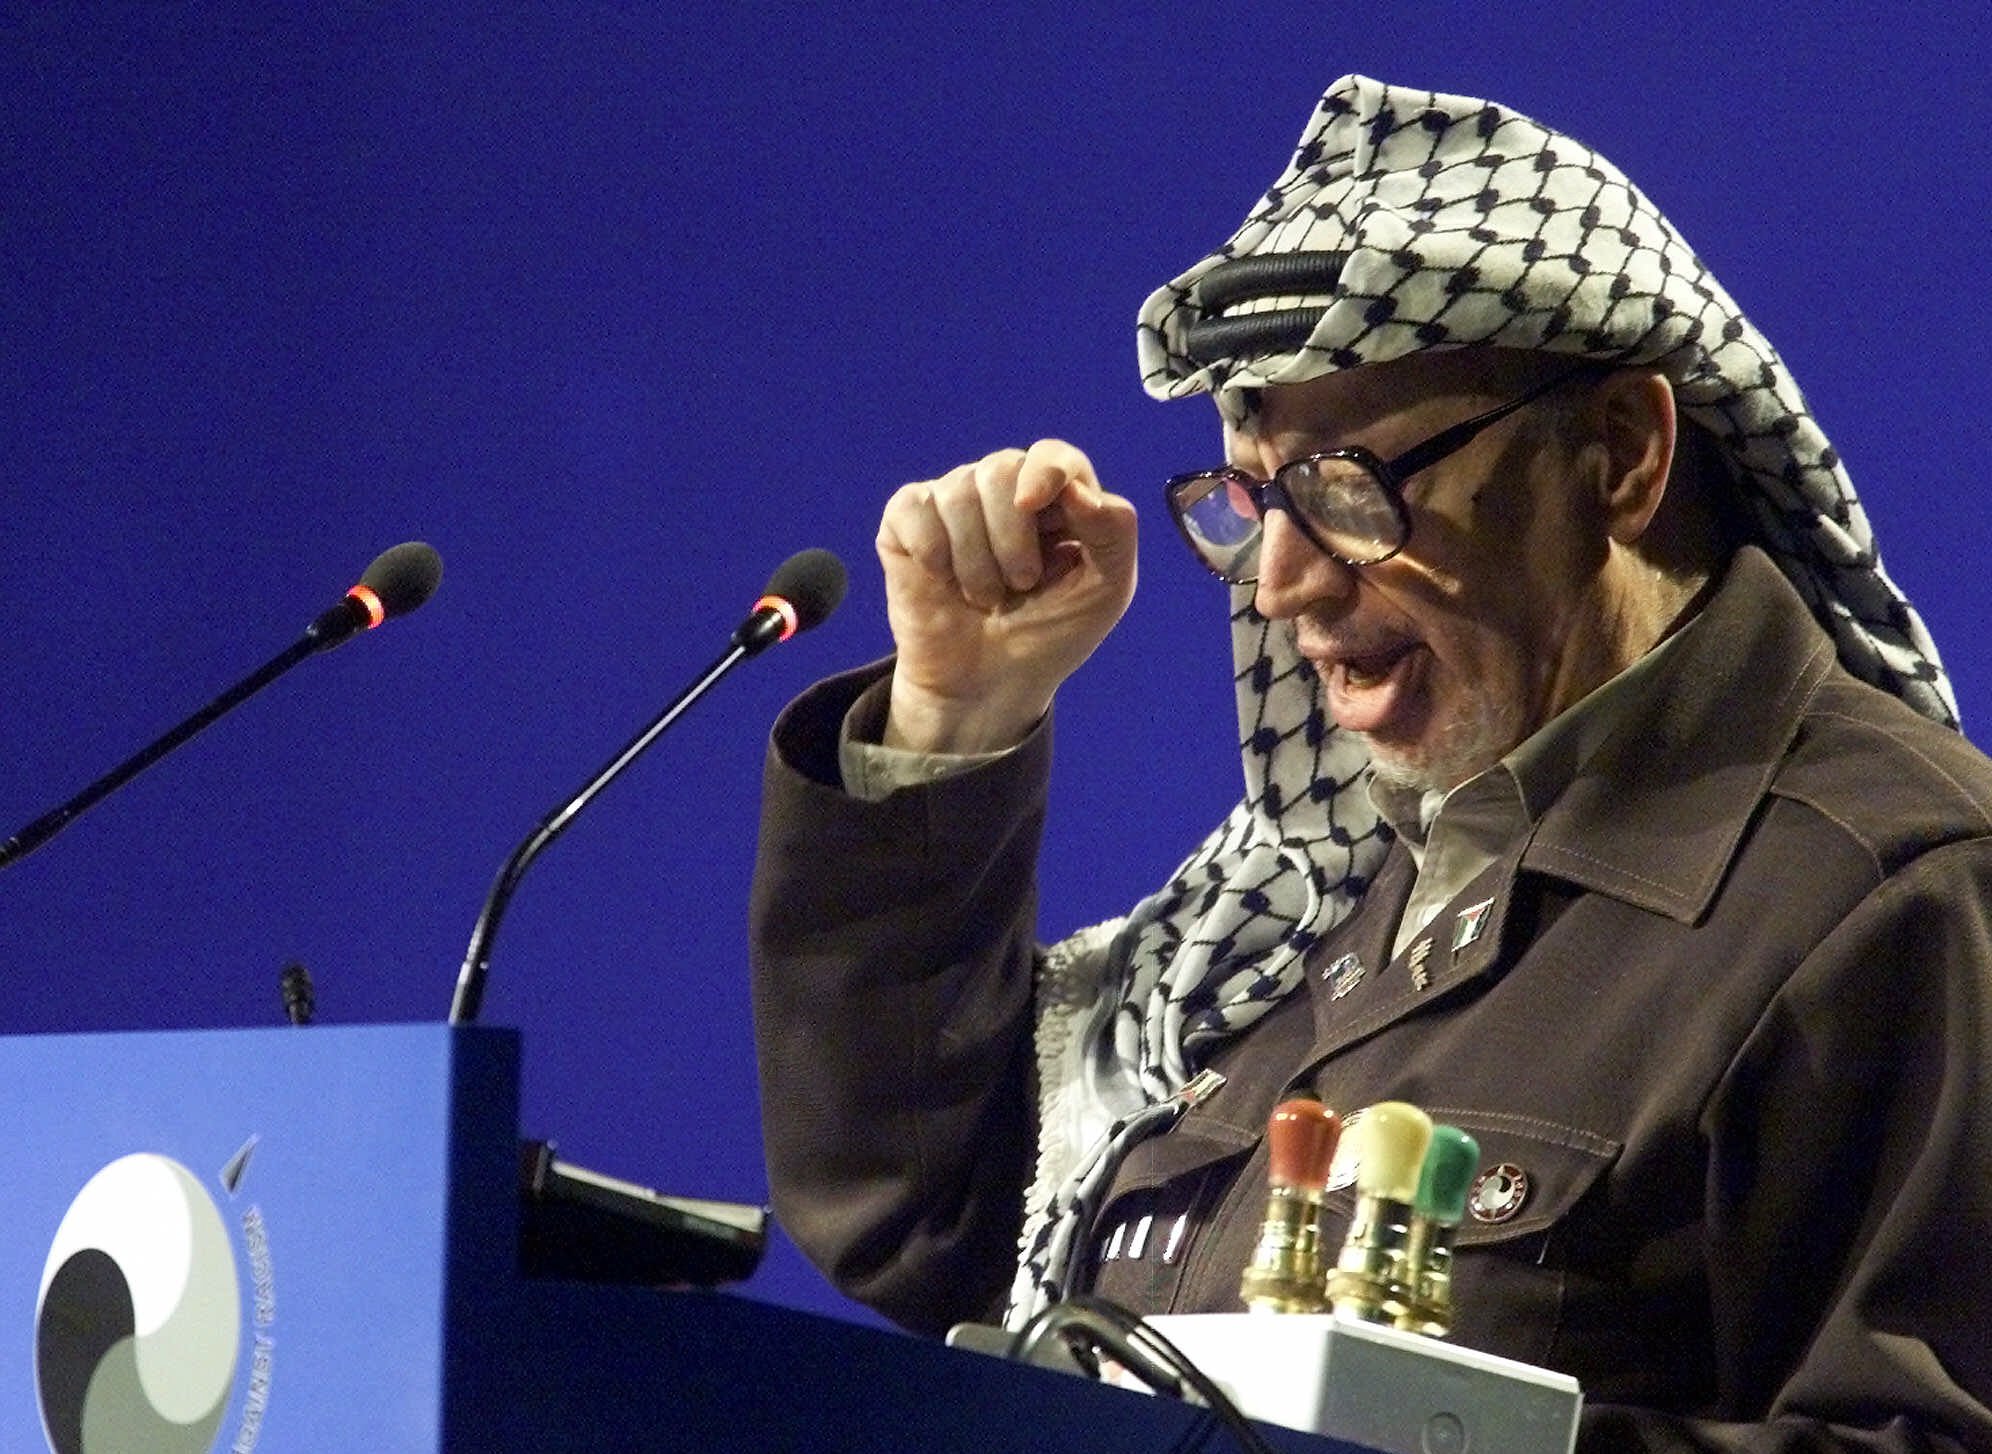 Palestinian leader Yasser Arafat, whose mission was to cleanse Jews from the Holy Land, rails against Israel at the infamous September 2001 Durban Conference. The UN celebrates this event—which was instrumental in perpetrating the “Israel apartheid lie”—again this September.